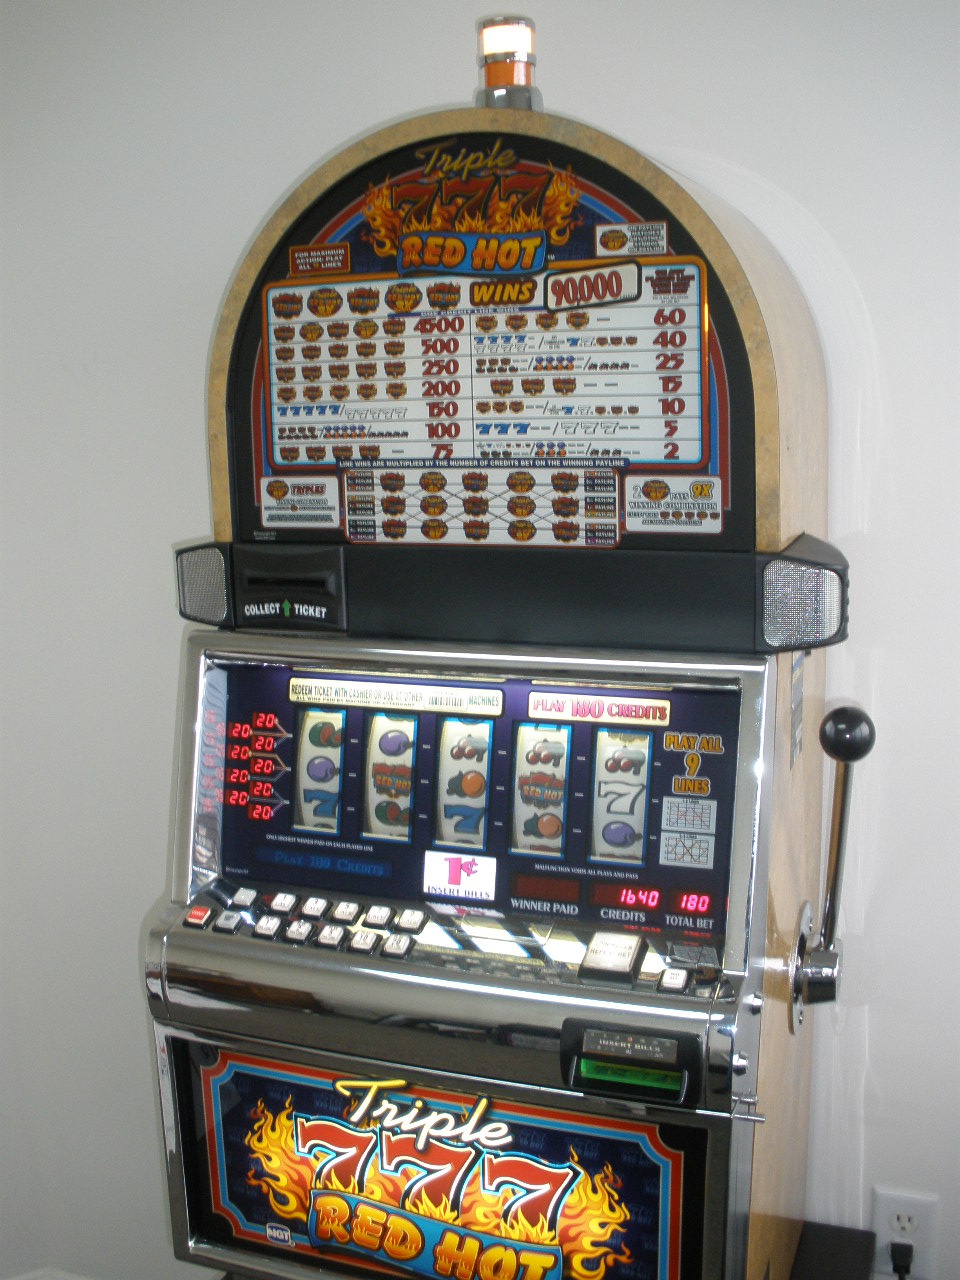 Triple red hot 777 slot machine for sale